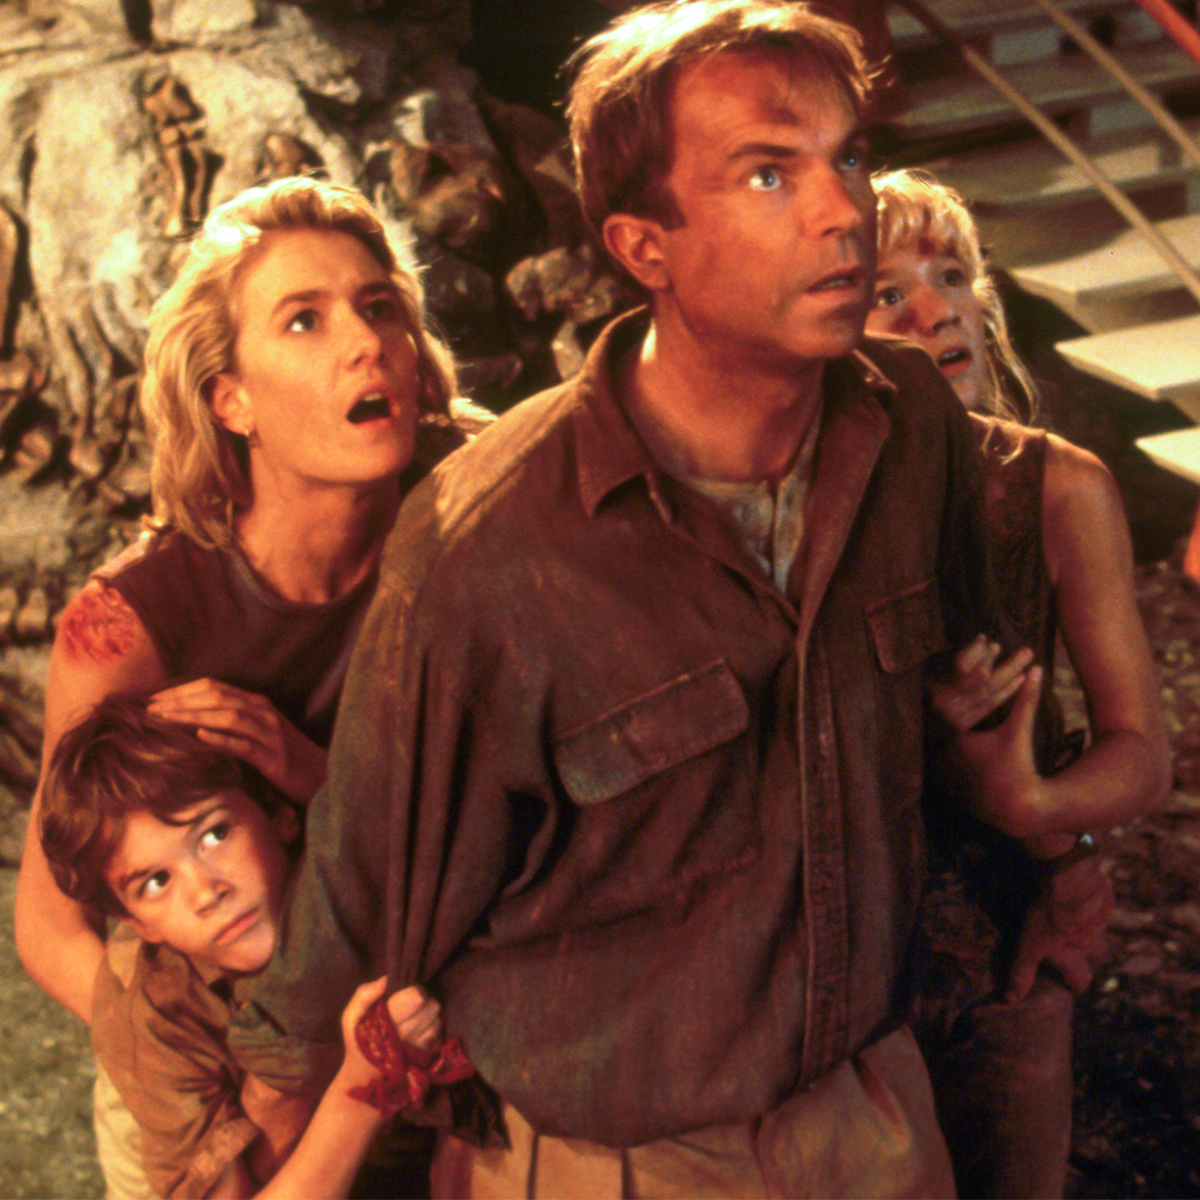 Jurassic Park & More Movies We Love to Watch This Week